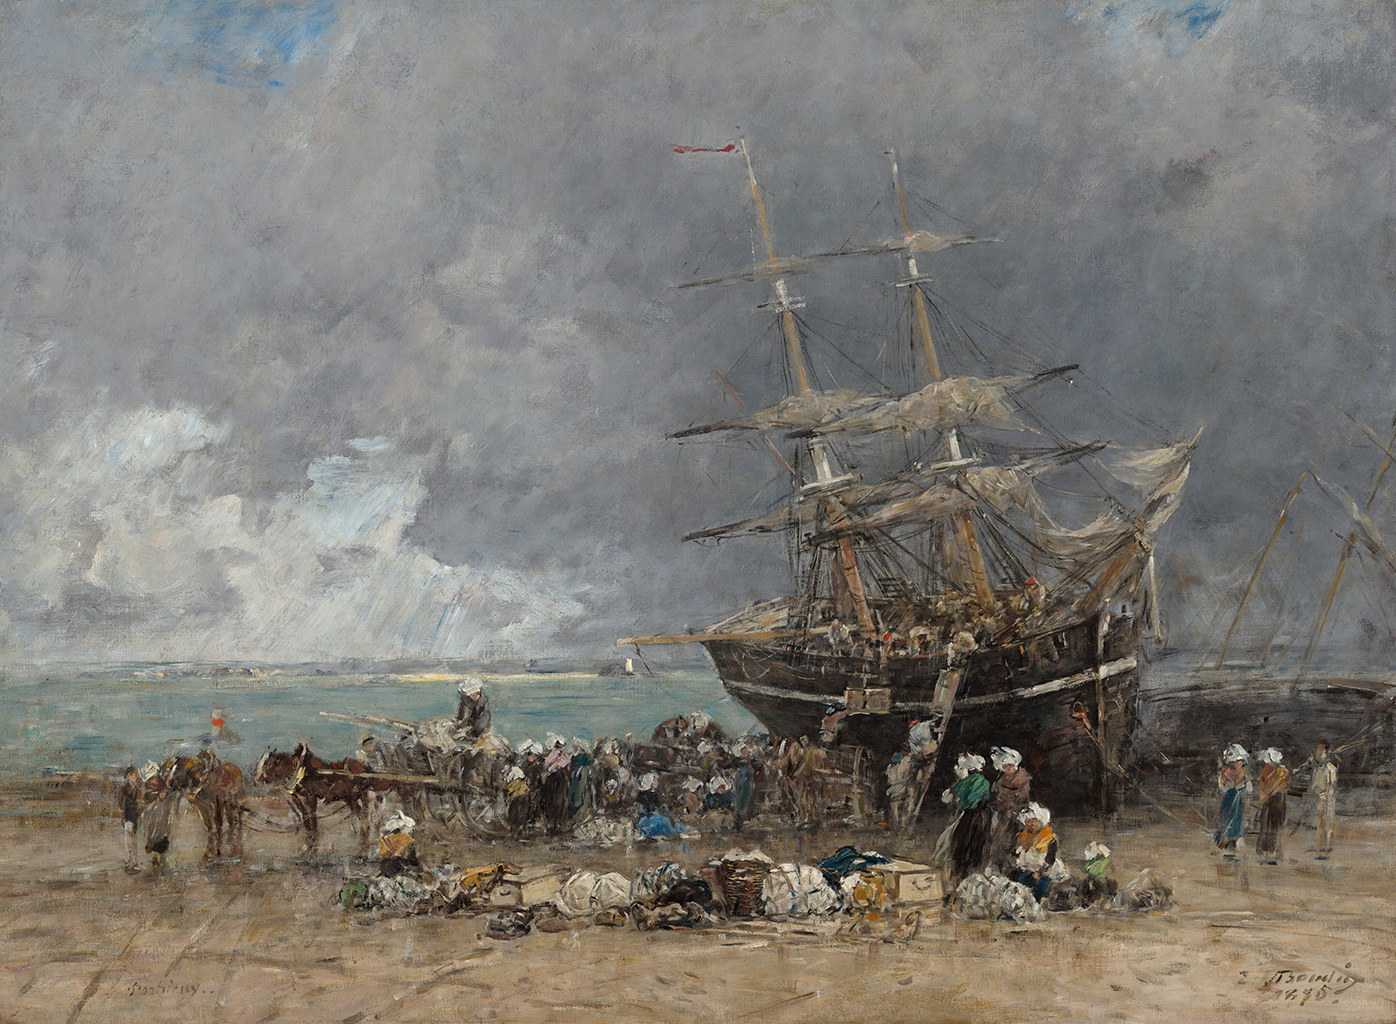 A painting depicts a large wooden ship beached on a shore. On the ship, people are unloading a variety of cargo and setting them on the beach. Another crowd sets the cargo onto wagons connected to horses. On the right side of the ship, a boat which is laying on its side. The background shows off a large ocean under a cloudy dark gray sky.